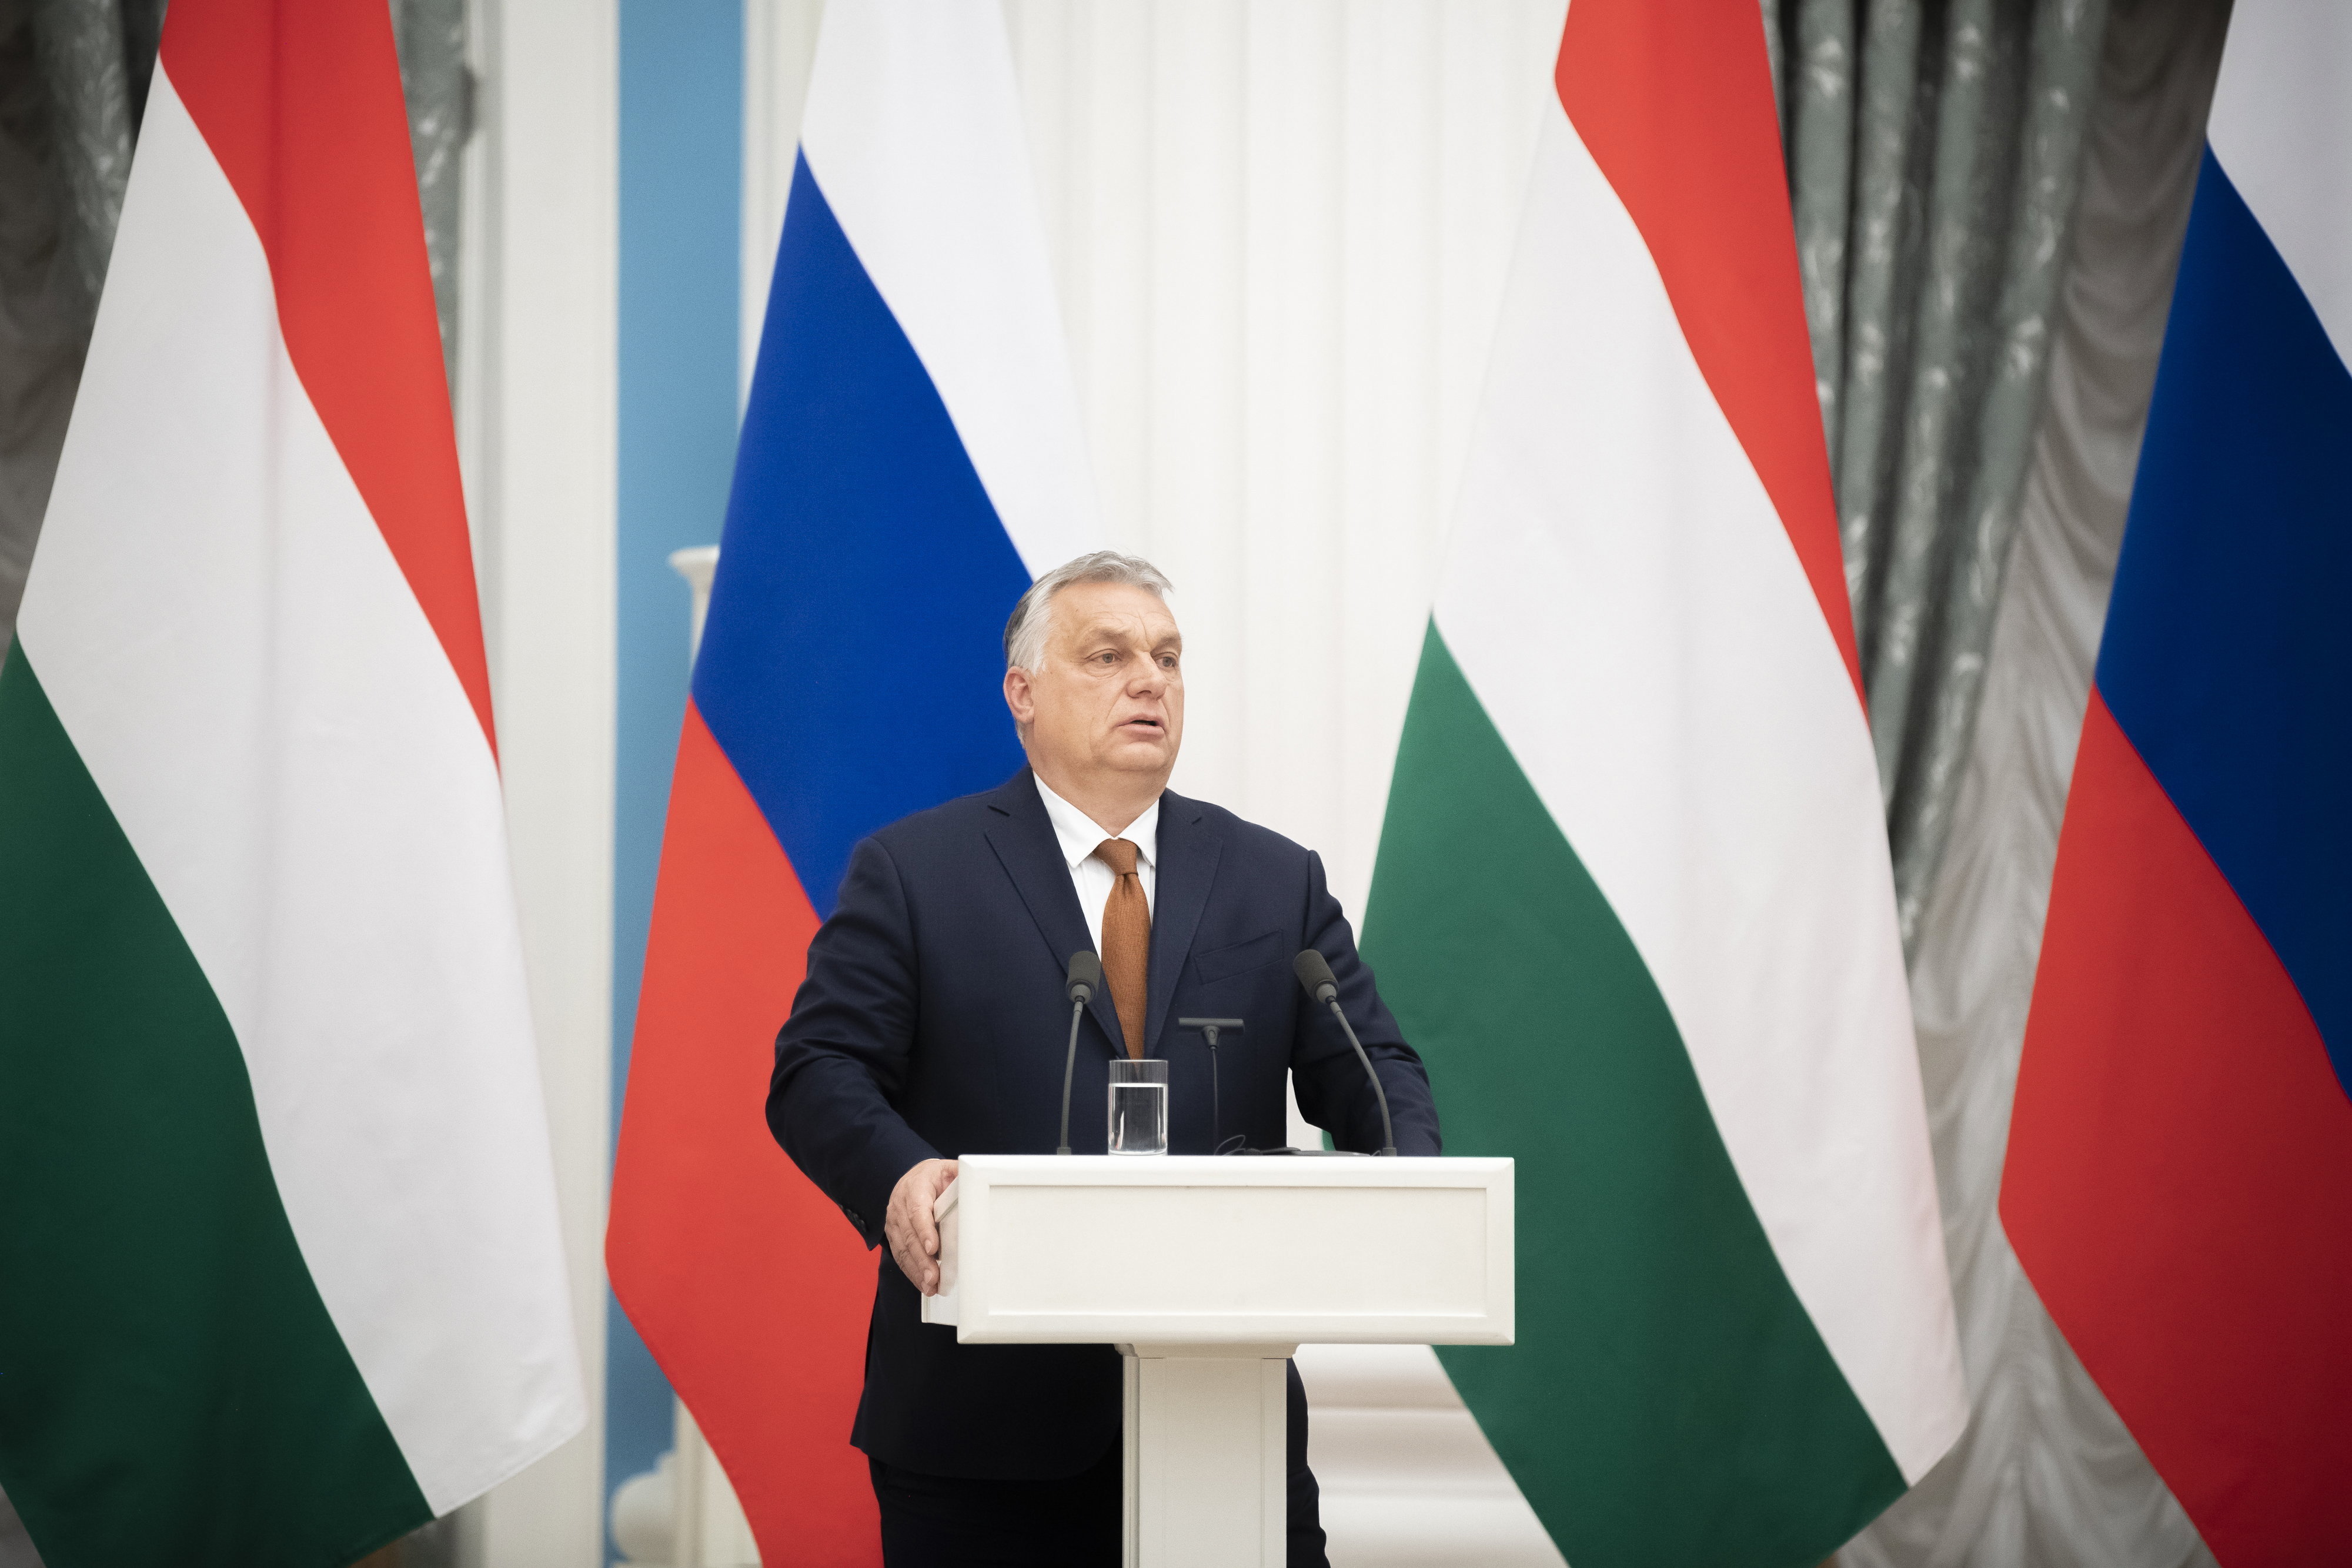 Orbán after Putin Meeting: “Wide Gap” between Russia’s “Security Demands” and Willingness of NATO Members “Can Be Bridged” post's picture